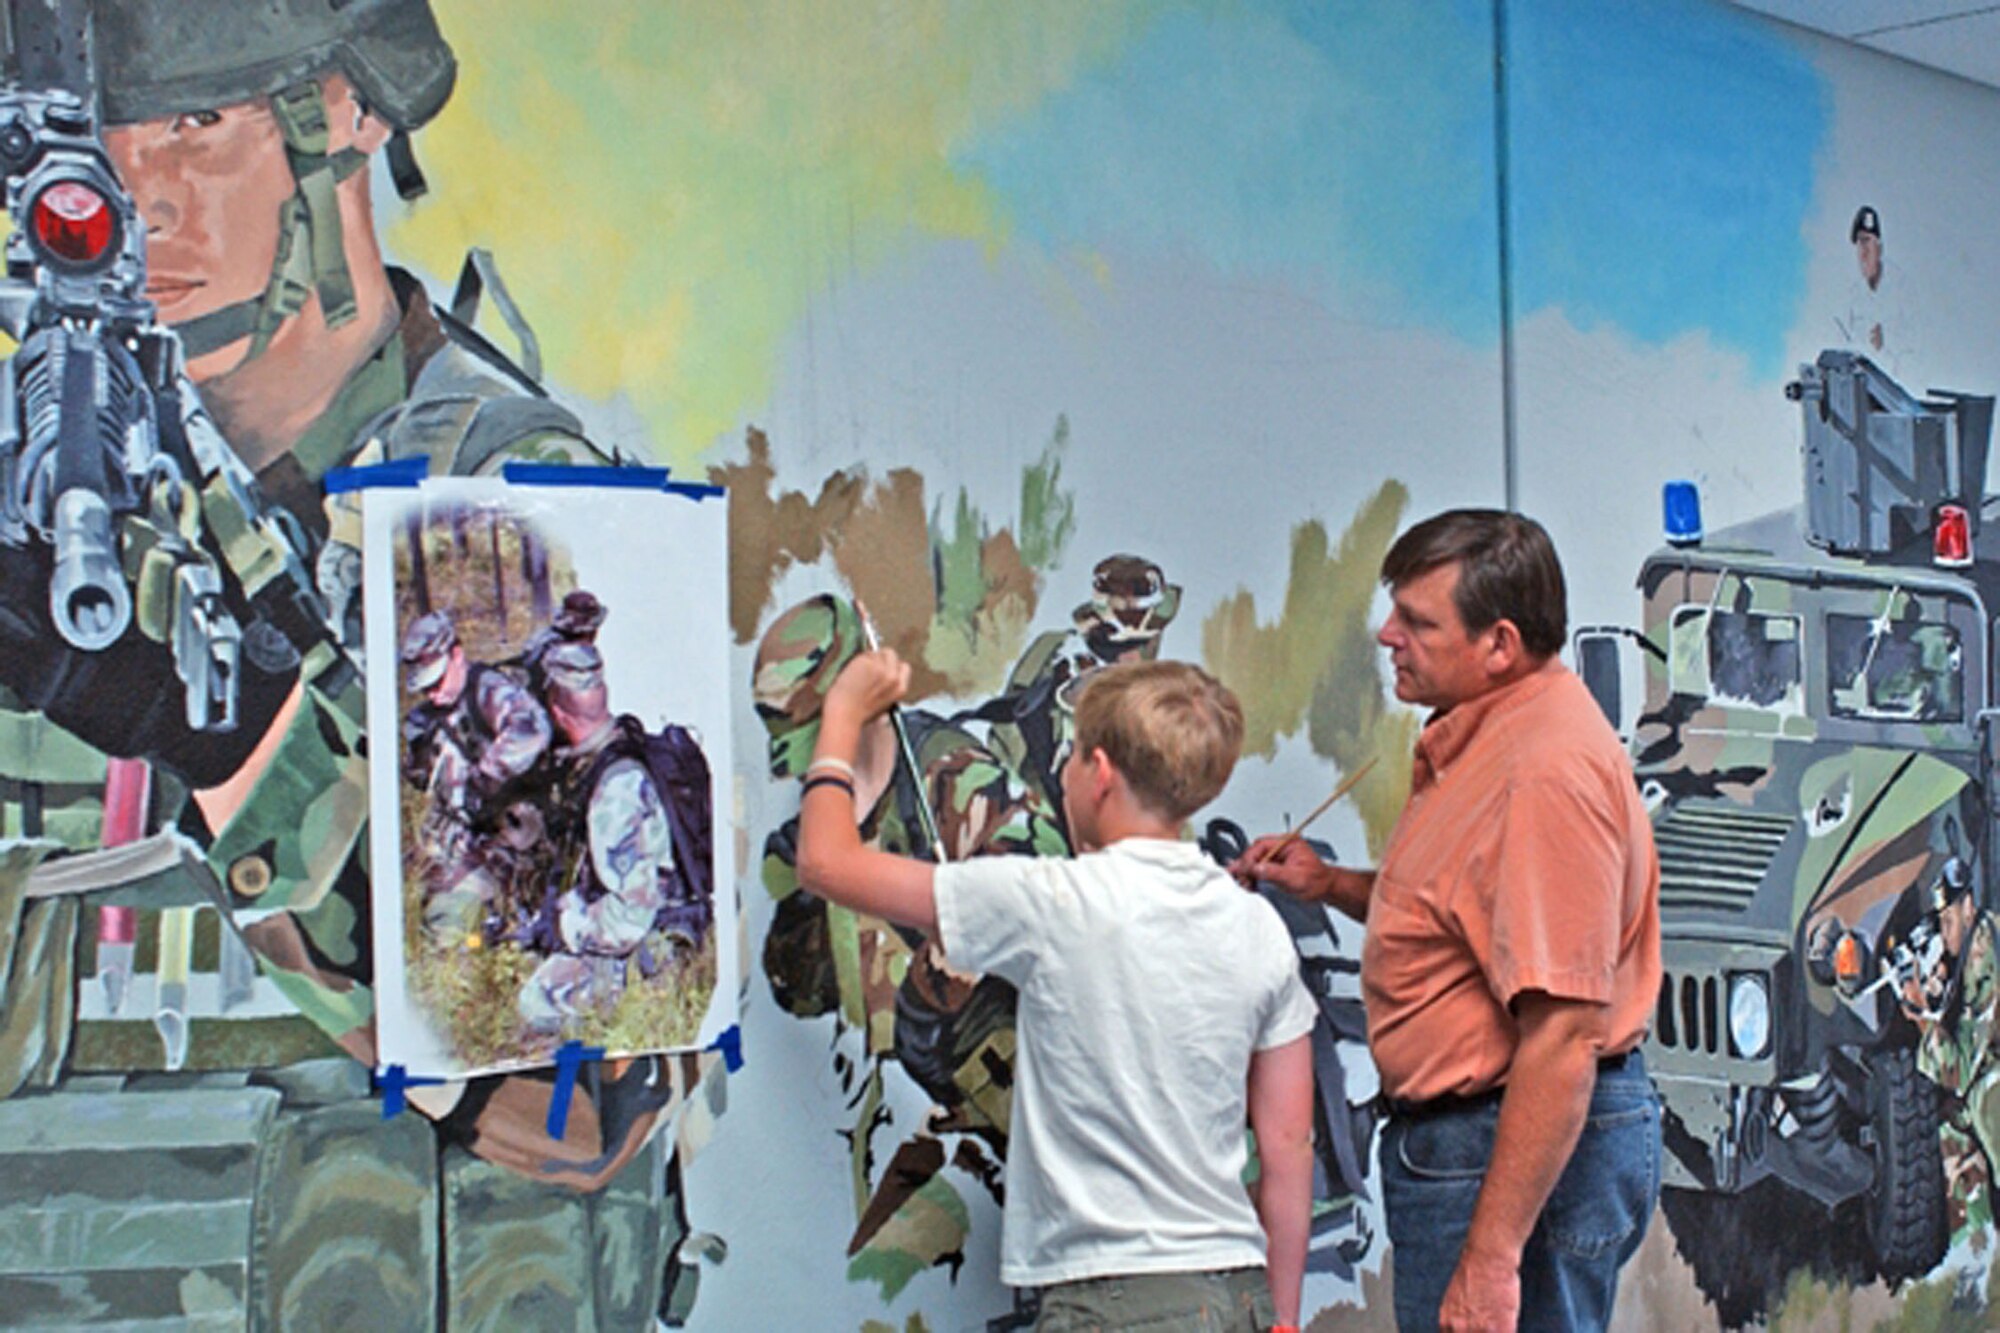 Bob Stillwell, 341st Communications Squadron contracted graphic artist, gets help from his grandson Logan, while painting a mural for the 341st Security Forces Group headquarters. Mr. Stillwell volunteered more than 230 hours of his off-duty time to paint the mural in honor of the security forces career field. His son Bobby flew in from Washington to help paint the background and HUMVEE, while Logan, who is an aspiring artist, traveled down to Malmstrom from Conrad, Mont. (U.S. Air Force photo)